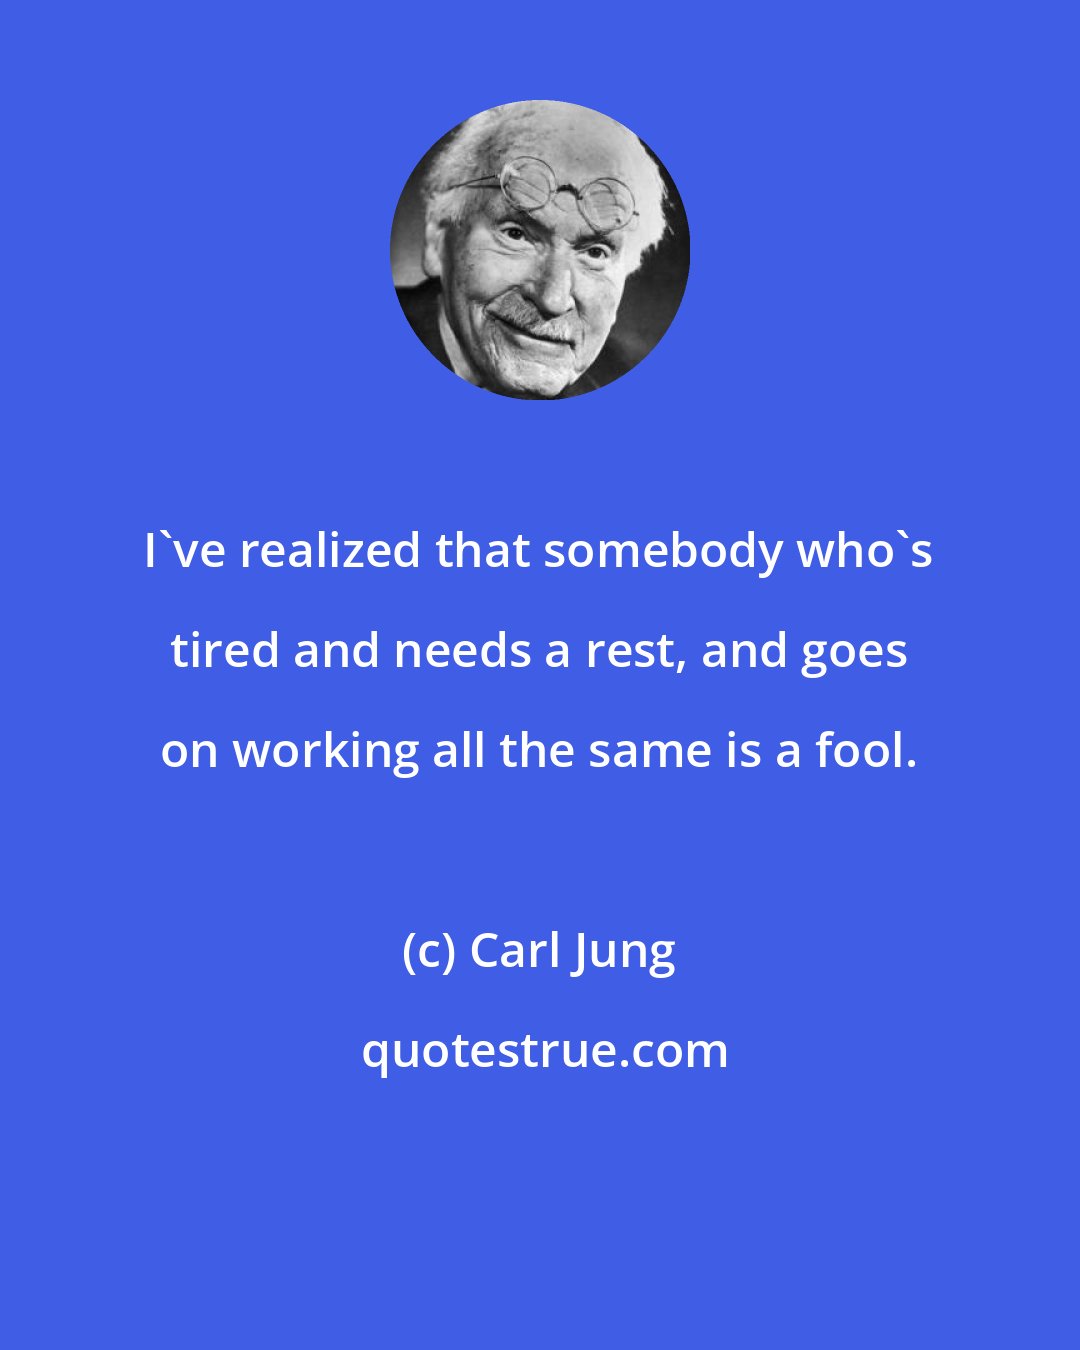 Carl Jung: I've realized that somebody who's tired and needs a rest, and goes on working all the same is a fool.